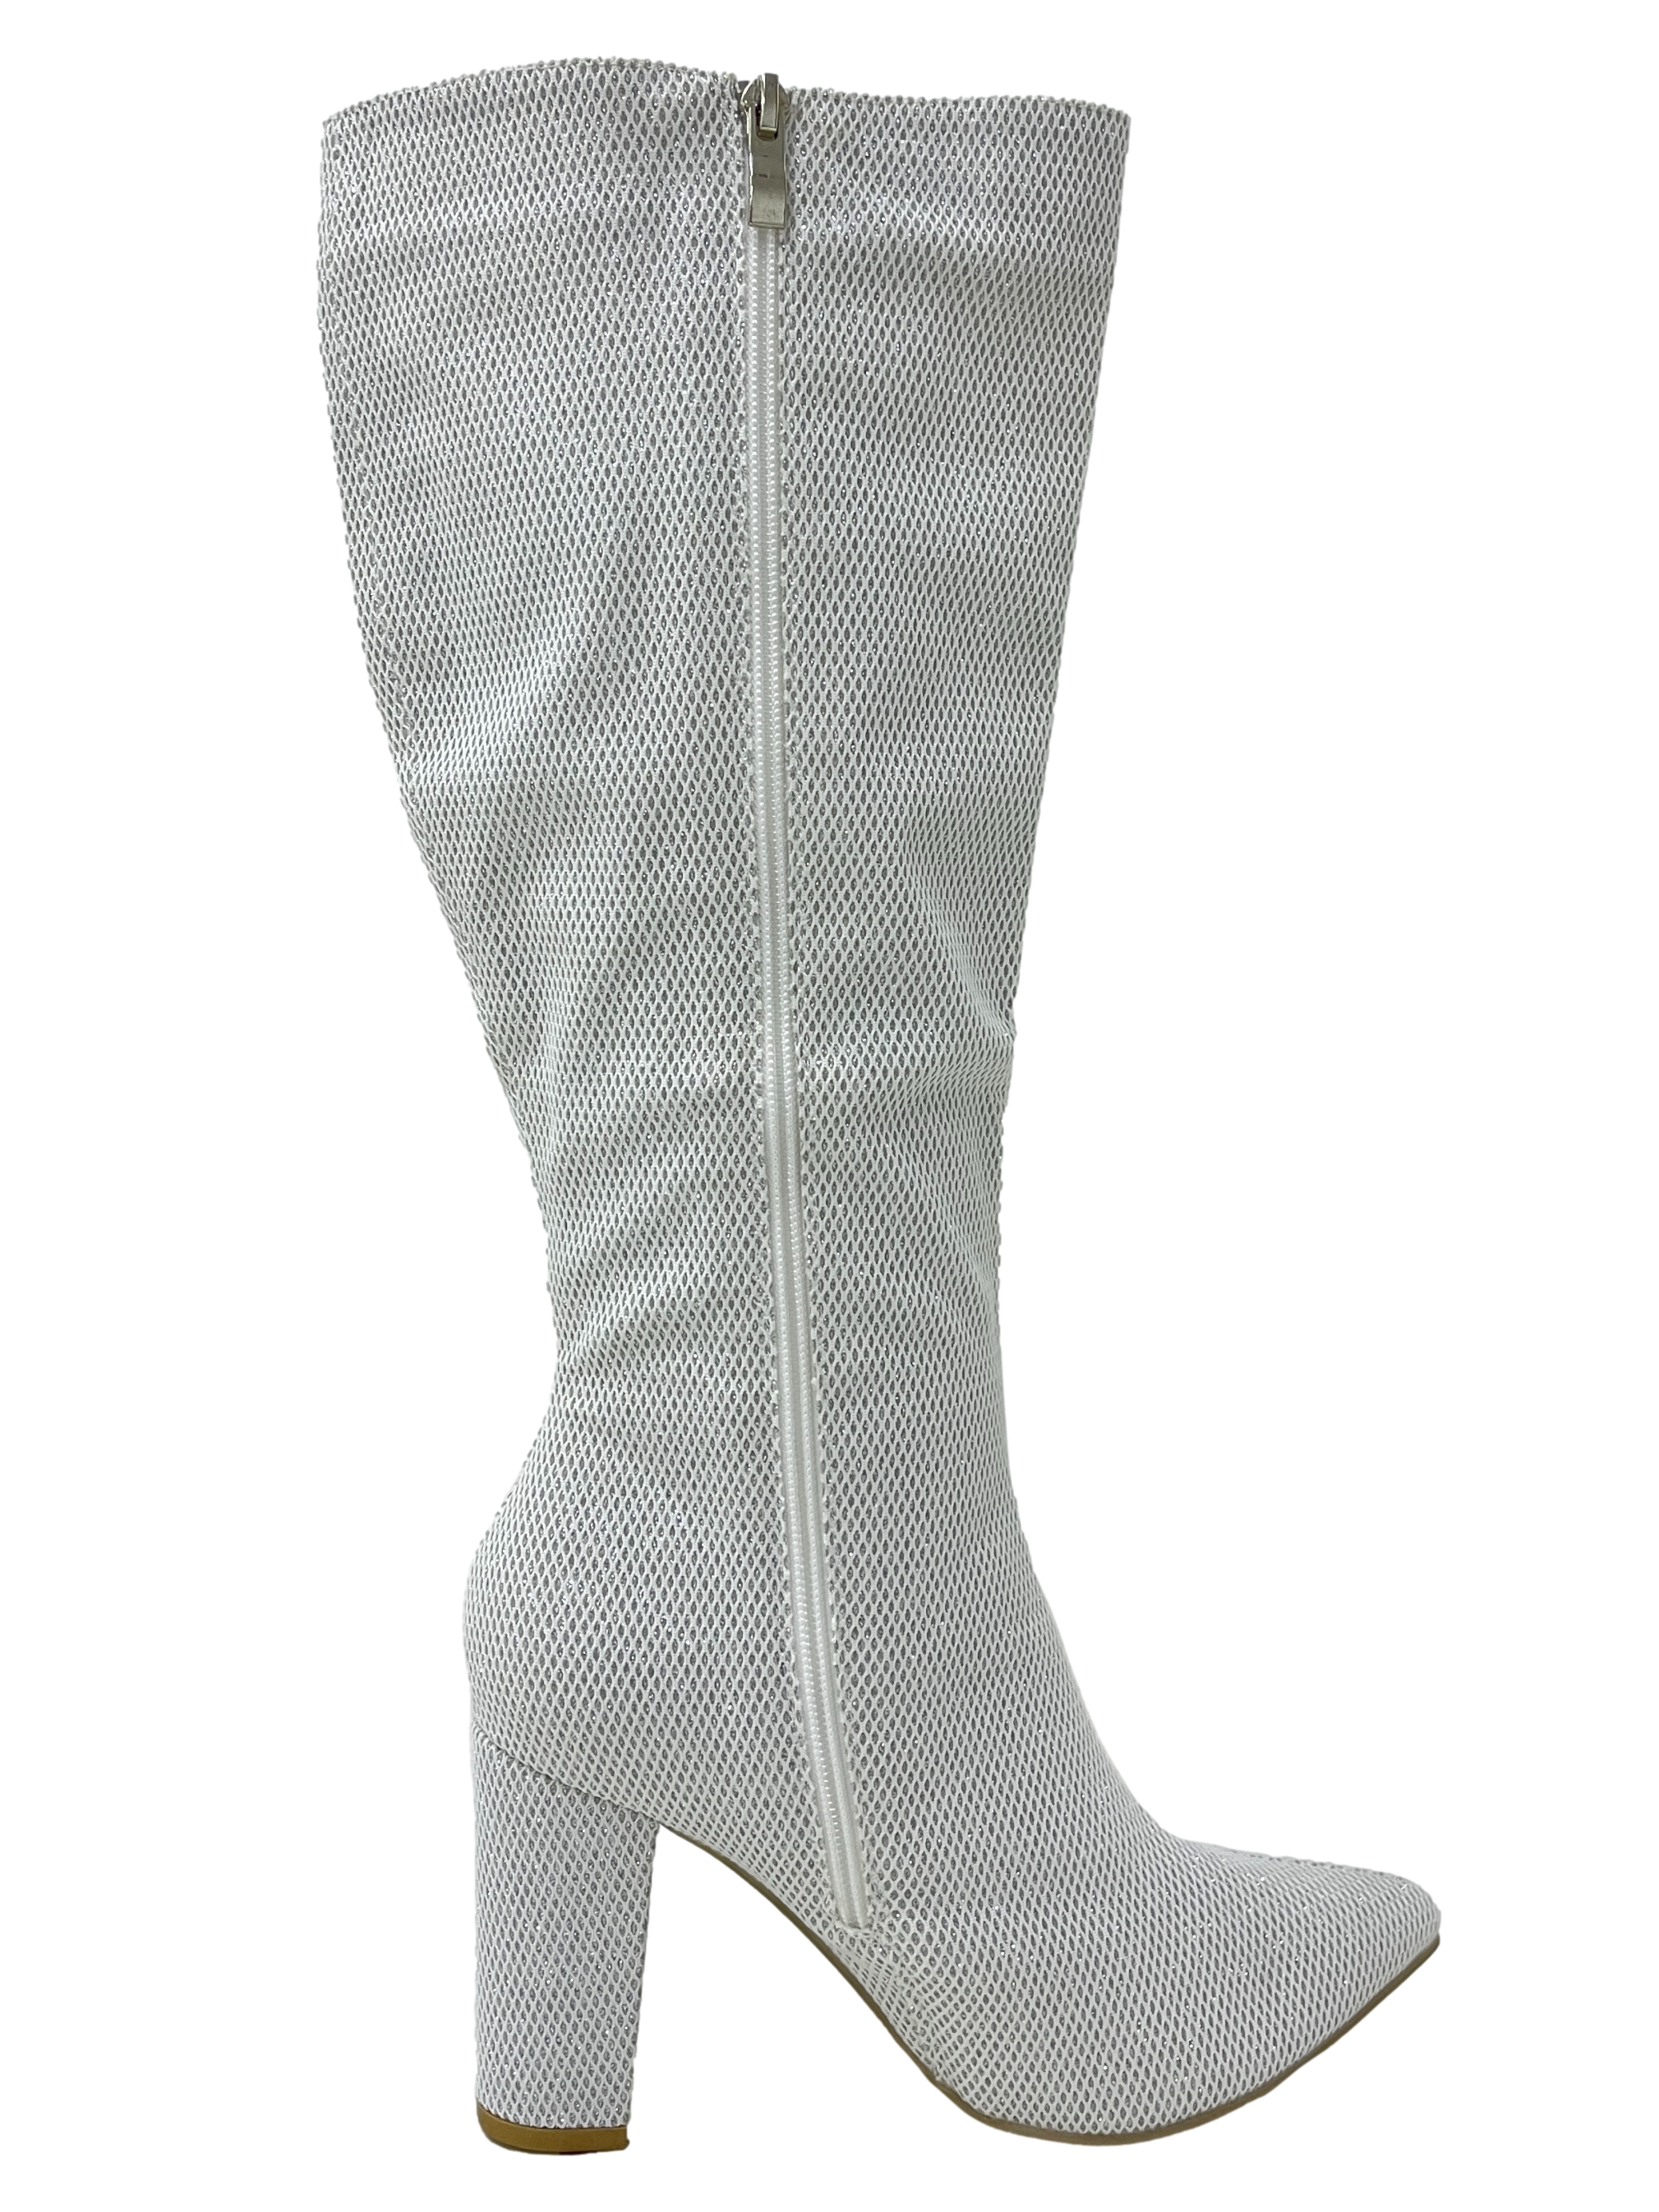 Silver Sparkly High Boots